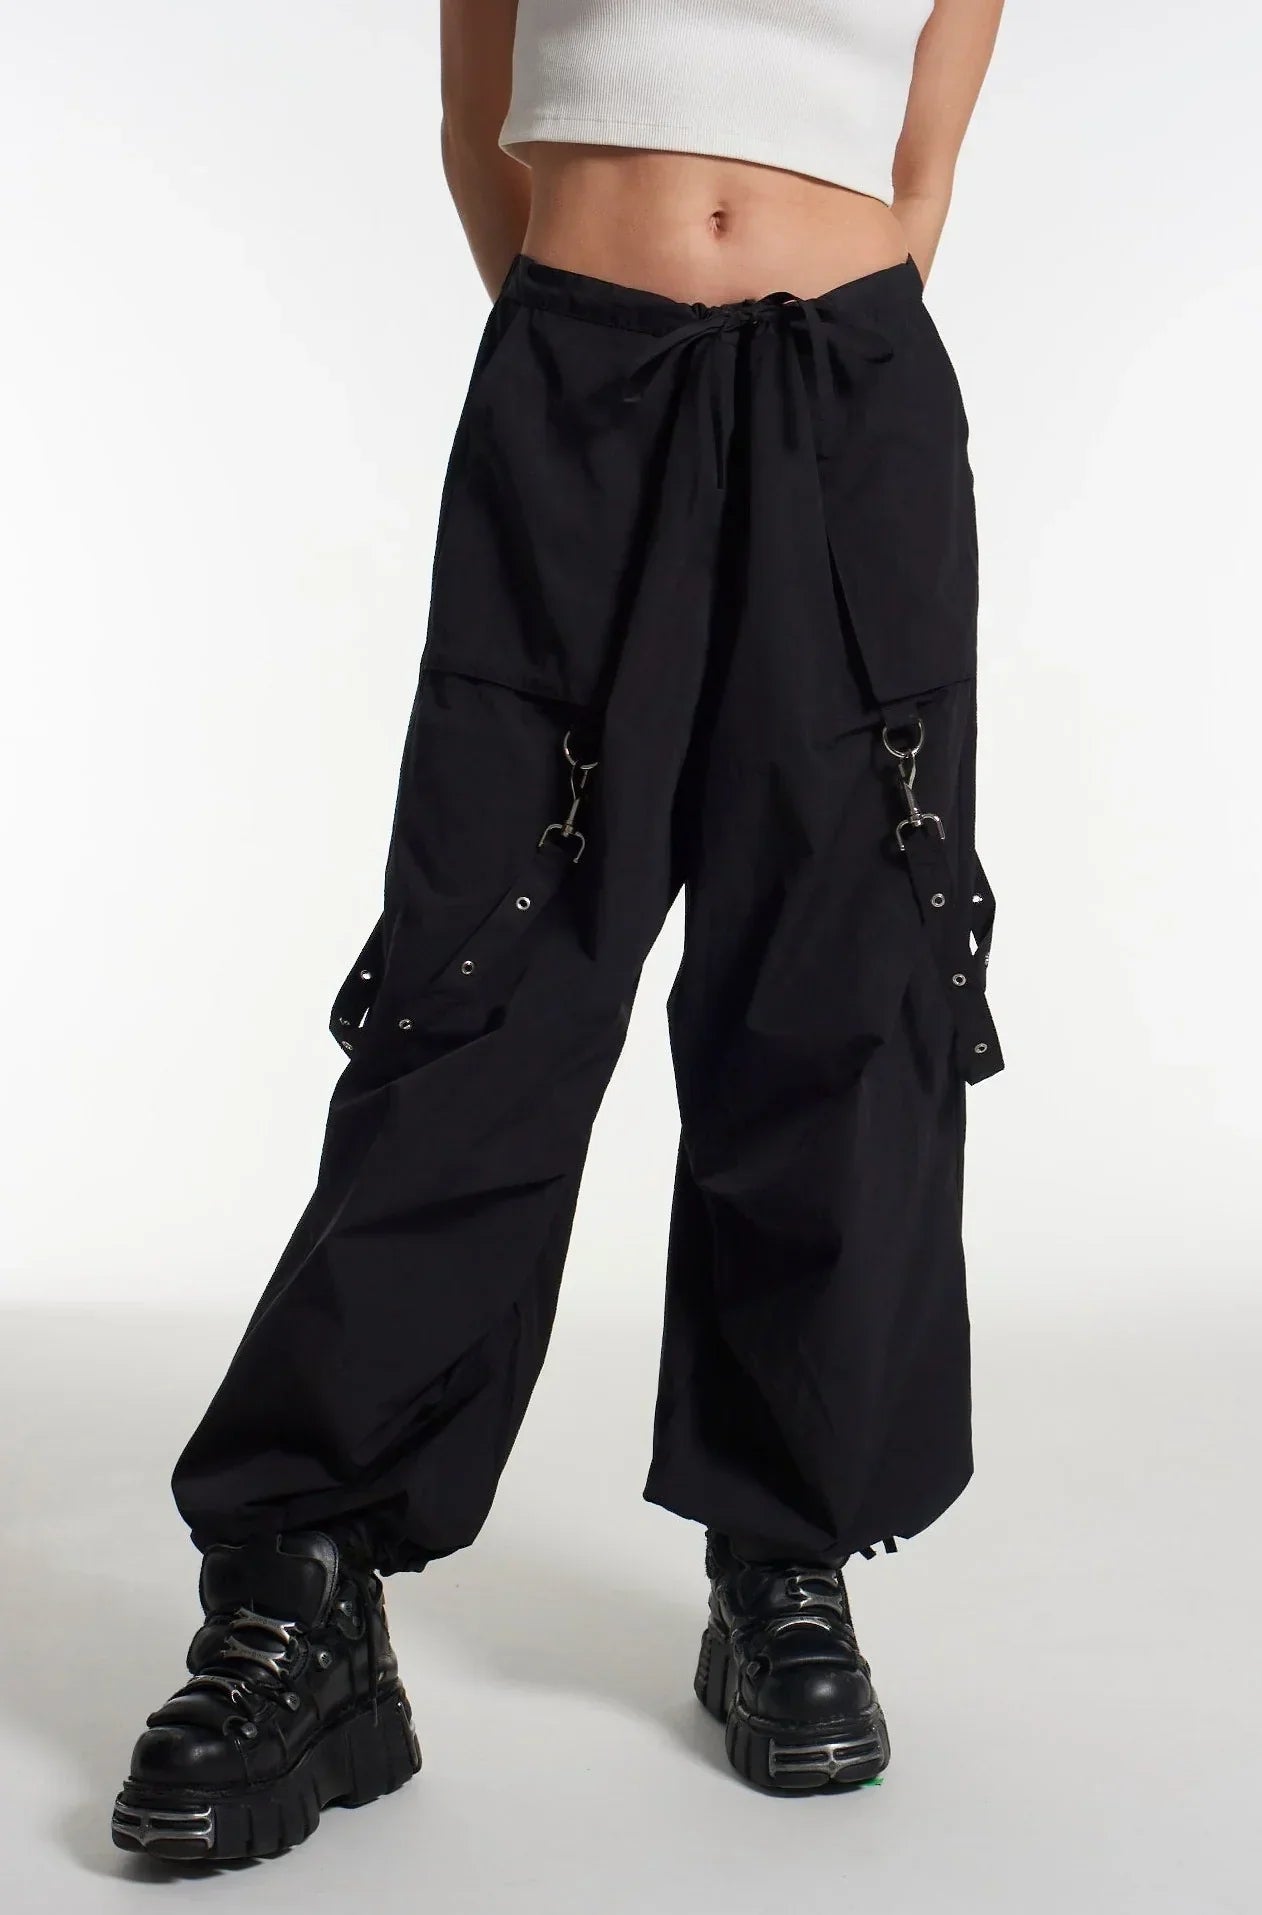 NOMAD PARACHUTE PANTS - EXCLUSIVE Pants from THE RAGGED PRIEST - Just €63! SHOP NOW AT IAMINHATELOVE BOTH IN STORE FOR CYPRUS AND ONLINE WORLDWIDE @ IAMINHATELOVE.COM